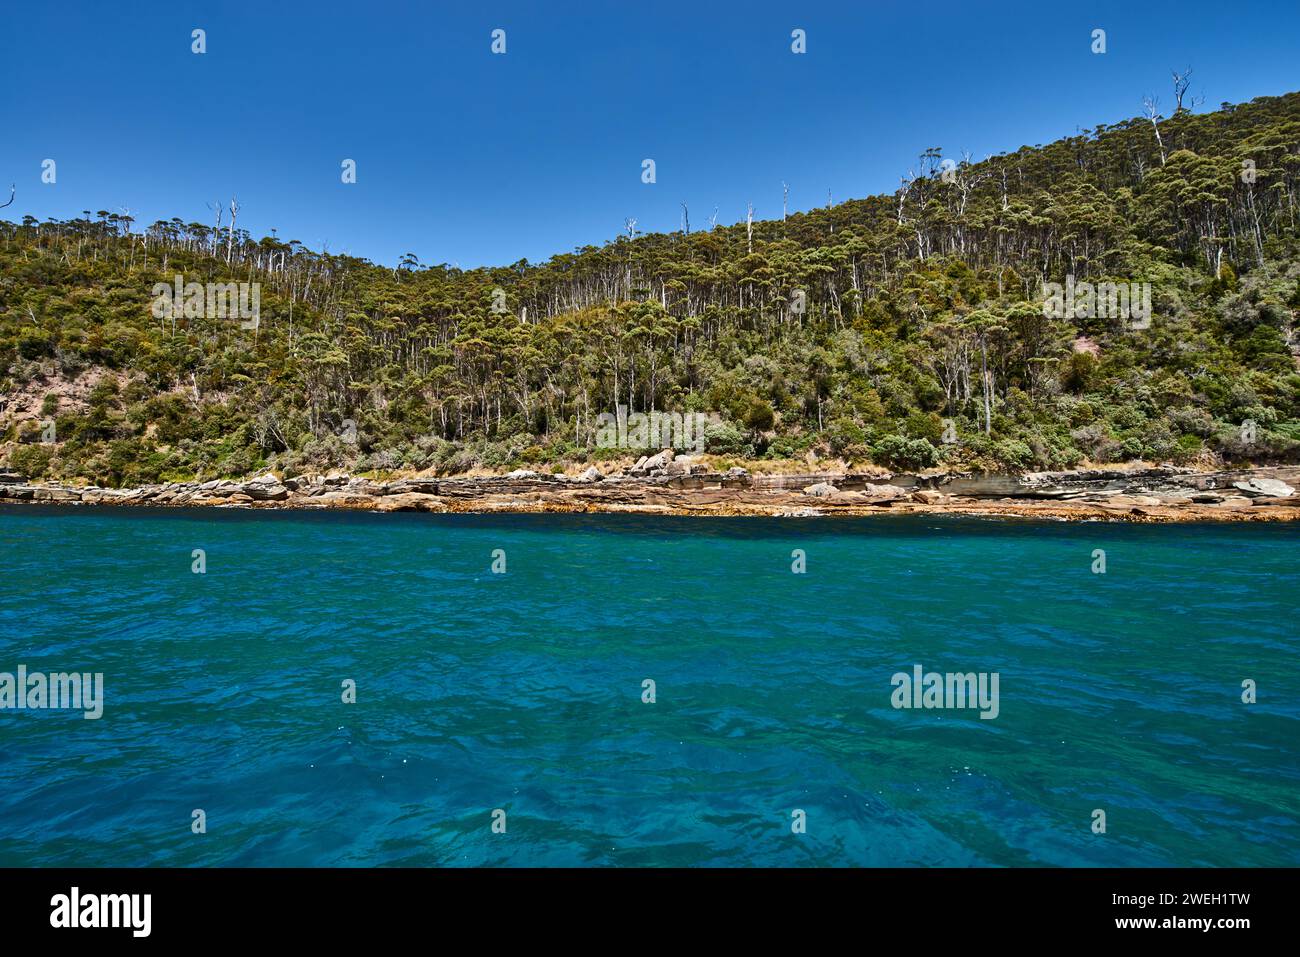 Deep blue water surrounded by rocks and trees Stock Photo